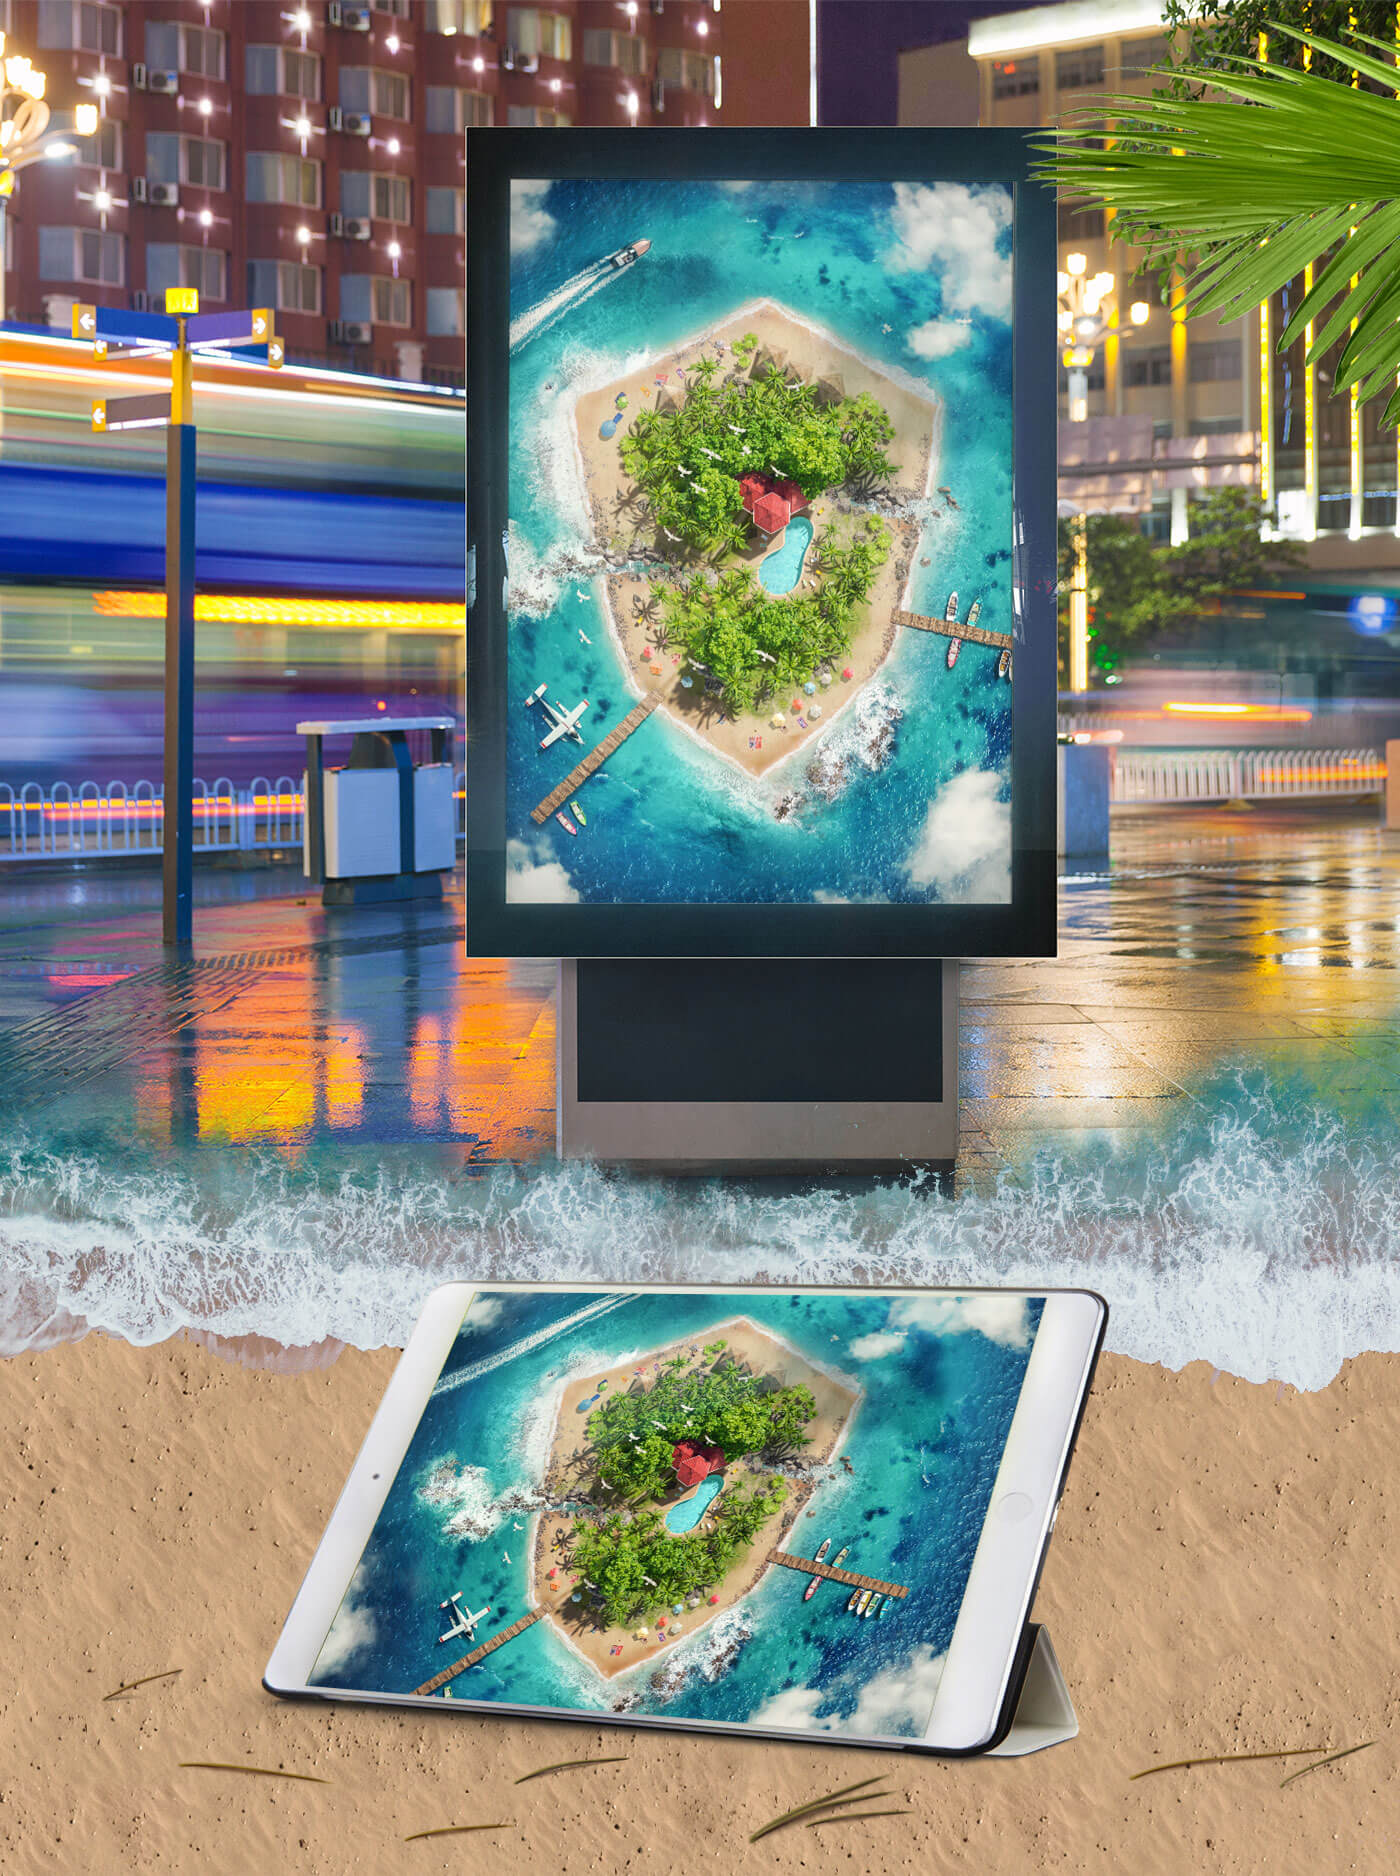 #5 Mockups - Island "Stiknecht" Visualization of an Island in the shape of my logo. 3D and Photo-Artwork by ruediger lauktien 2018 200 best digital artists